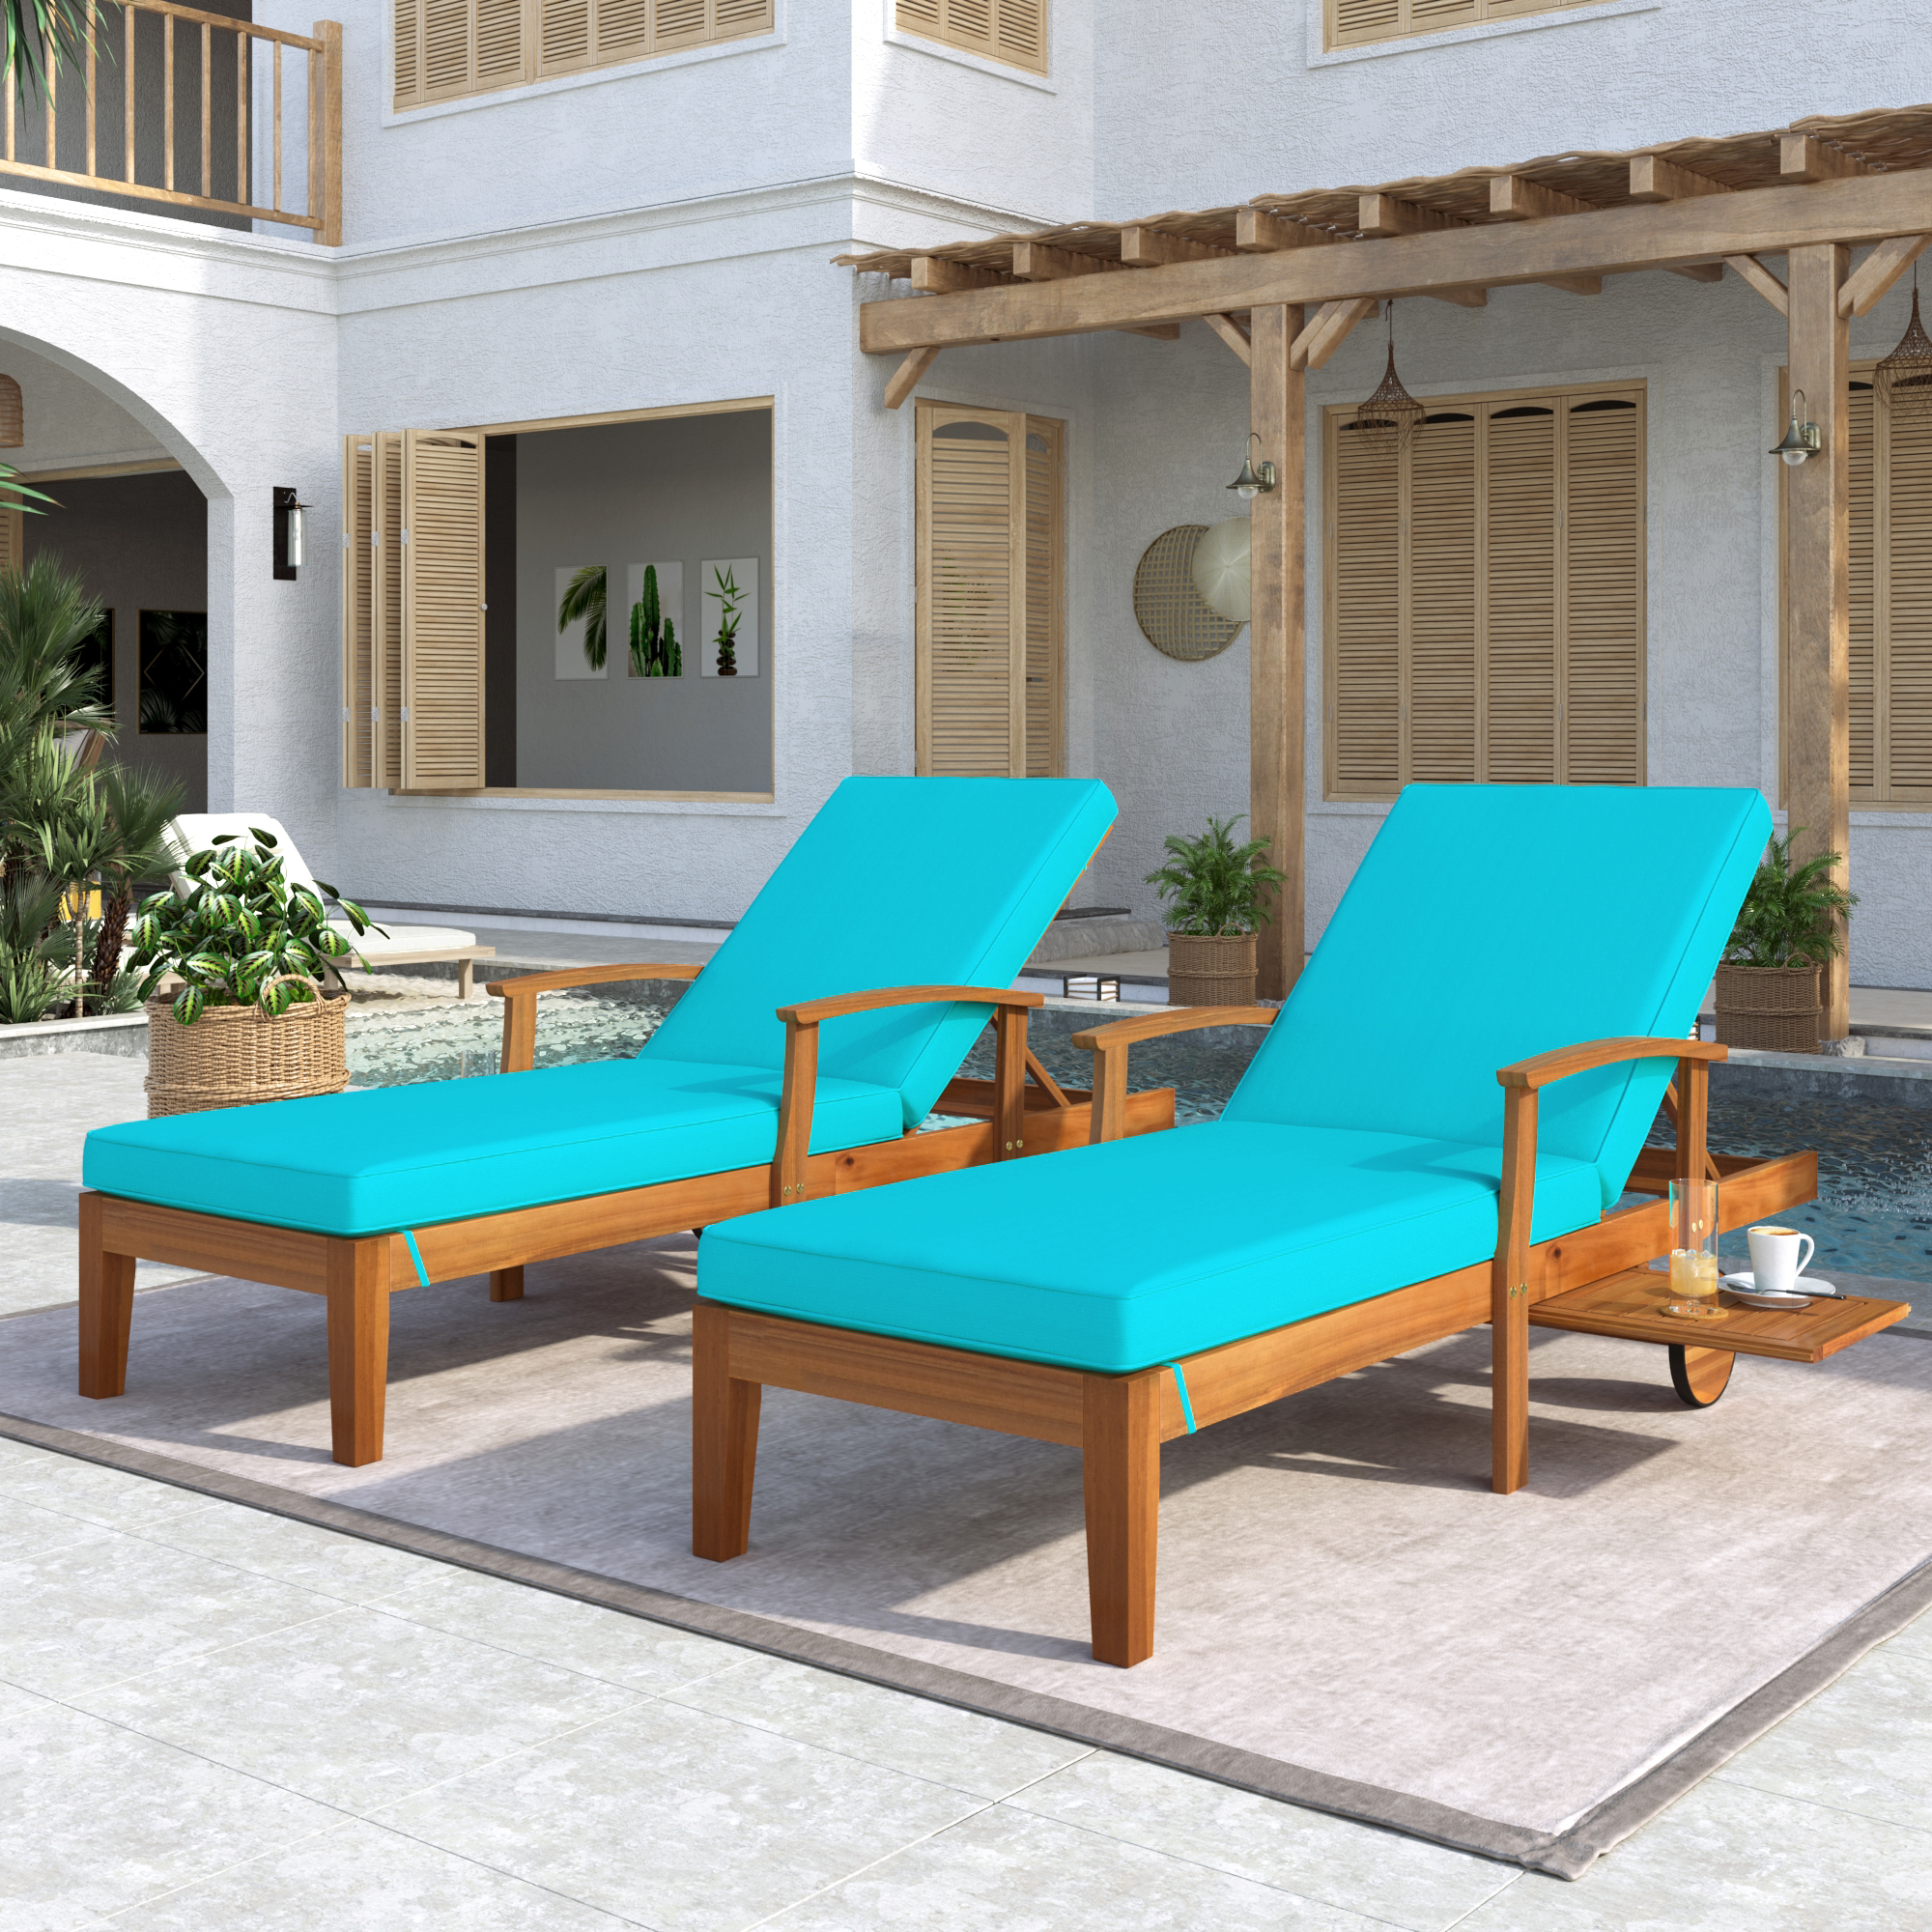 Sesslife Outdoor Solid Wood Chaise Lounge, 2 Piece Patio Brown Finish Reclining Chair Furniture Set Beach Pool Adjustable Backrest Recliners with Blue Cushions - image 1 of 10